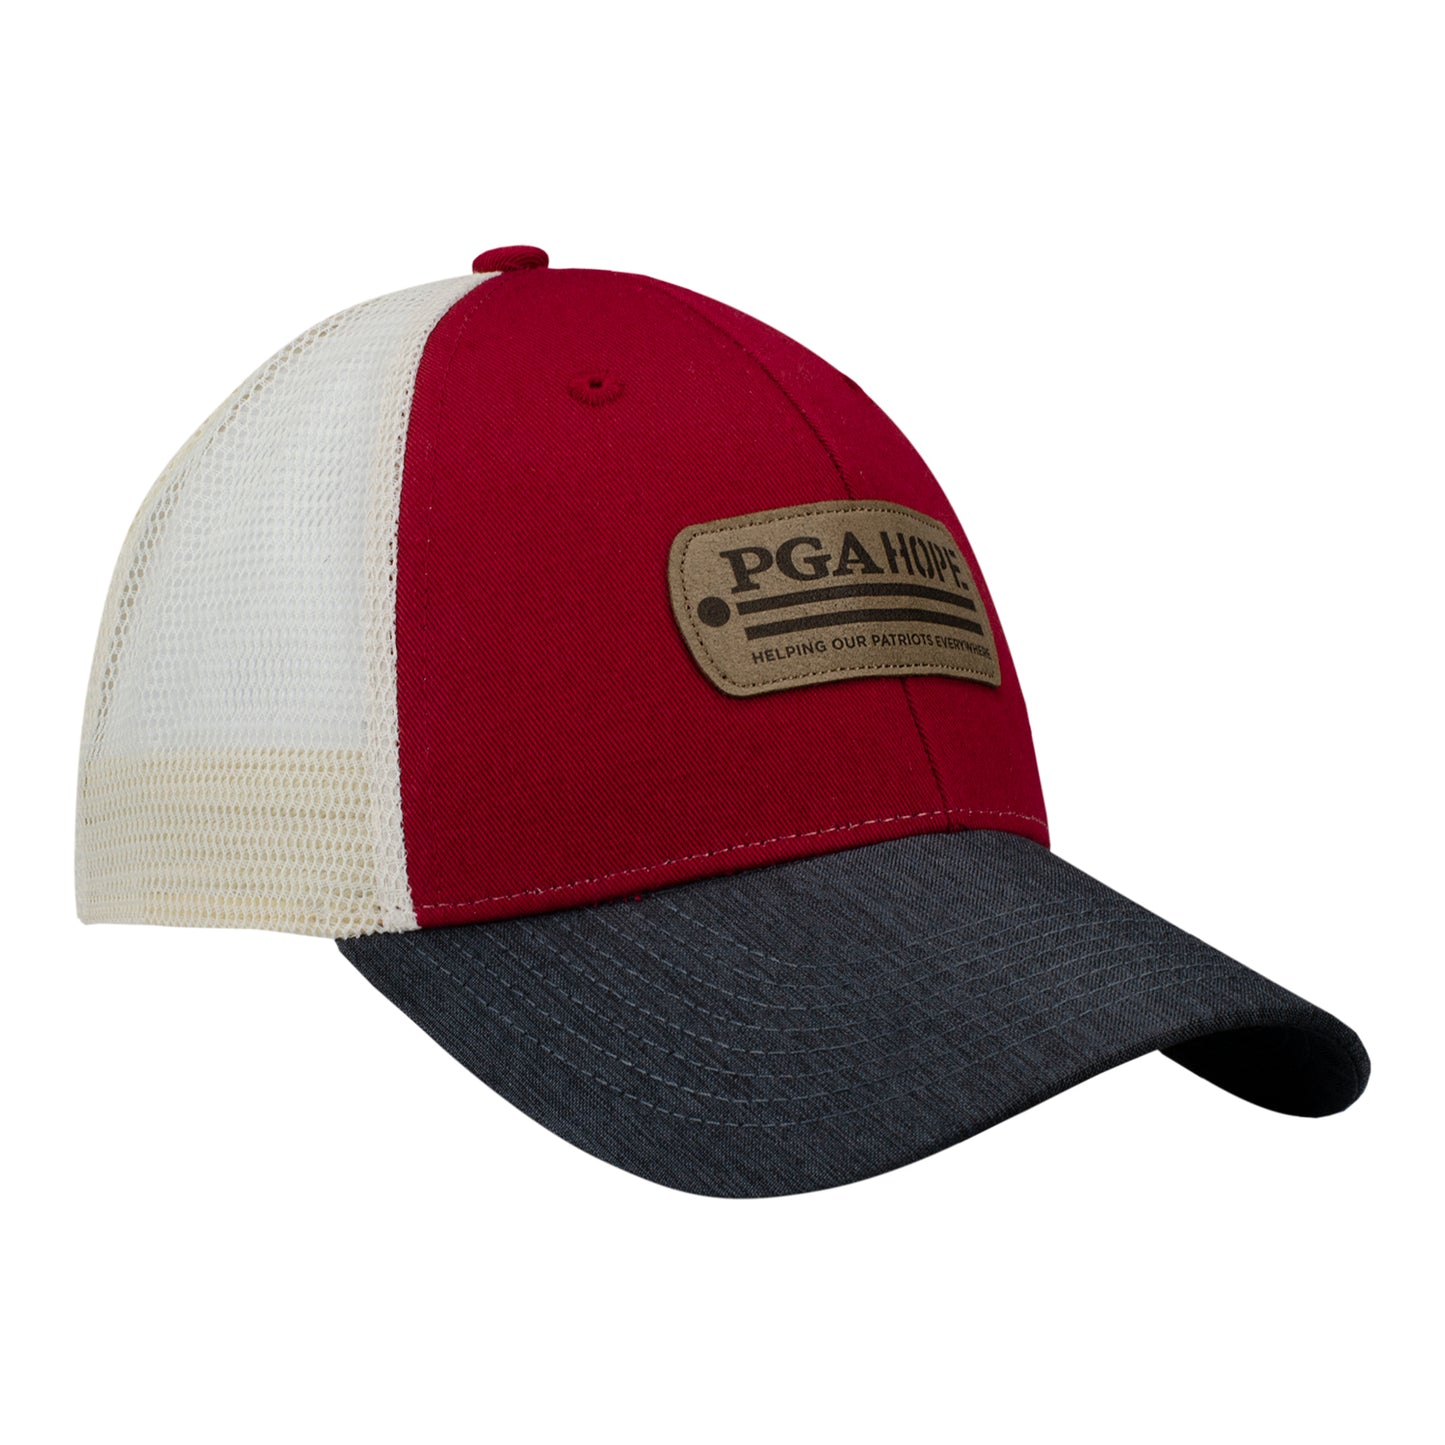 Ahead PGA HOPE Classic-Fit Structured Meshback Hat in Red & White - Front Right Angled View